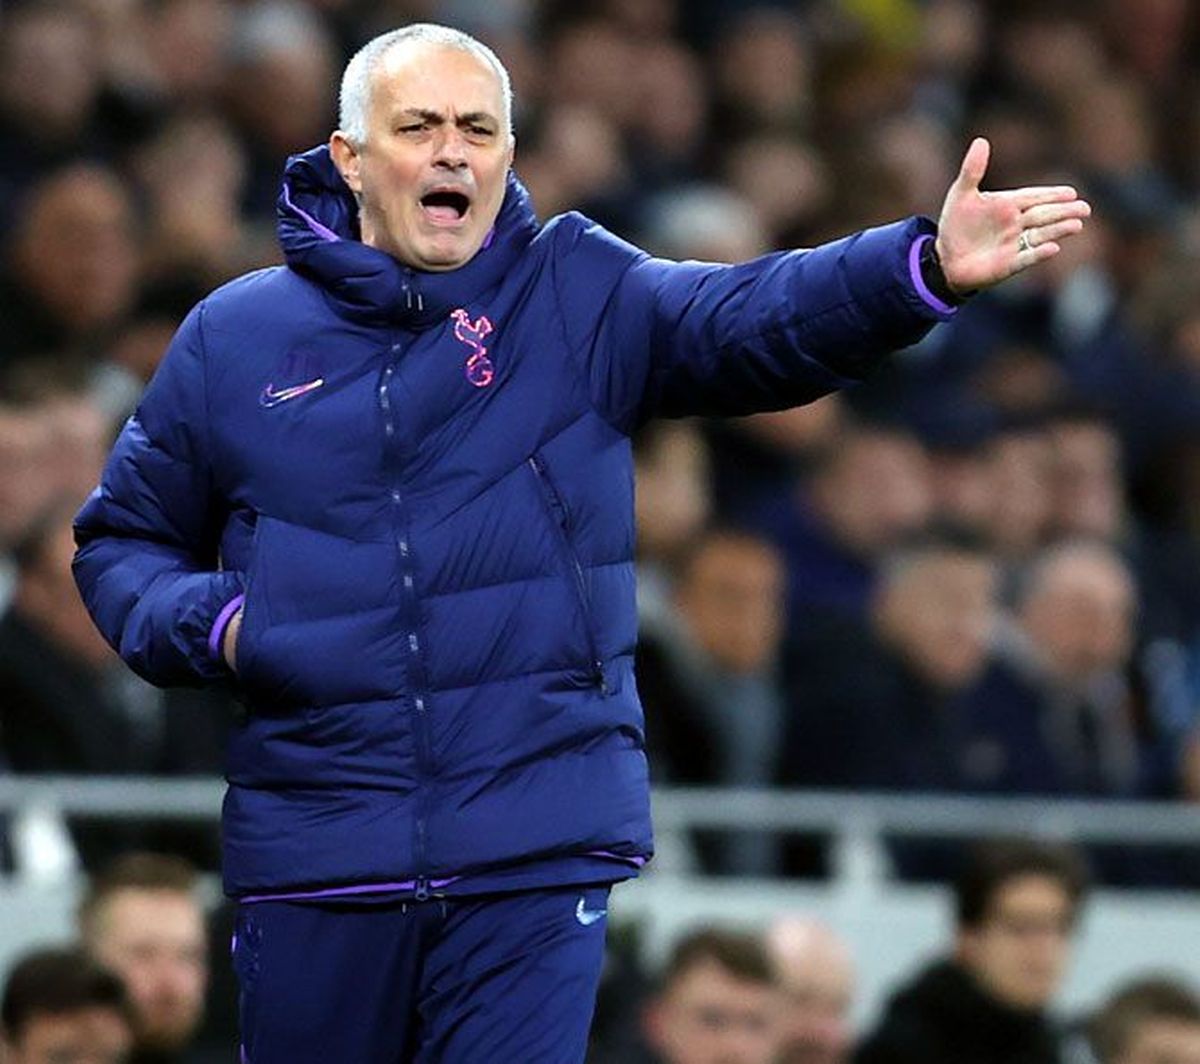 Hours before the match, Spurs boss Jose Mourinho said he was still in the dark regarding the status of the match